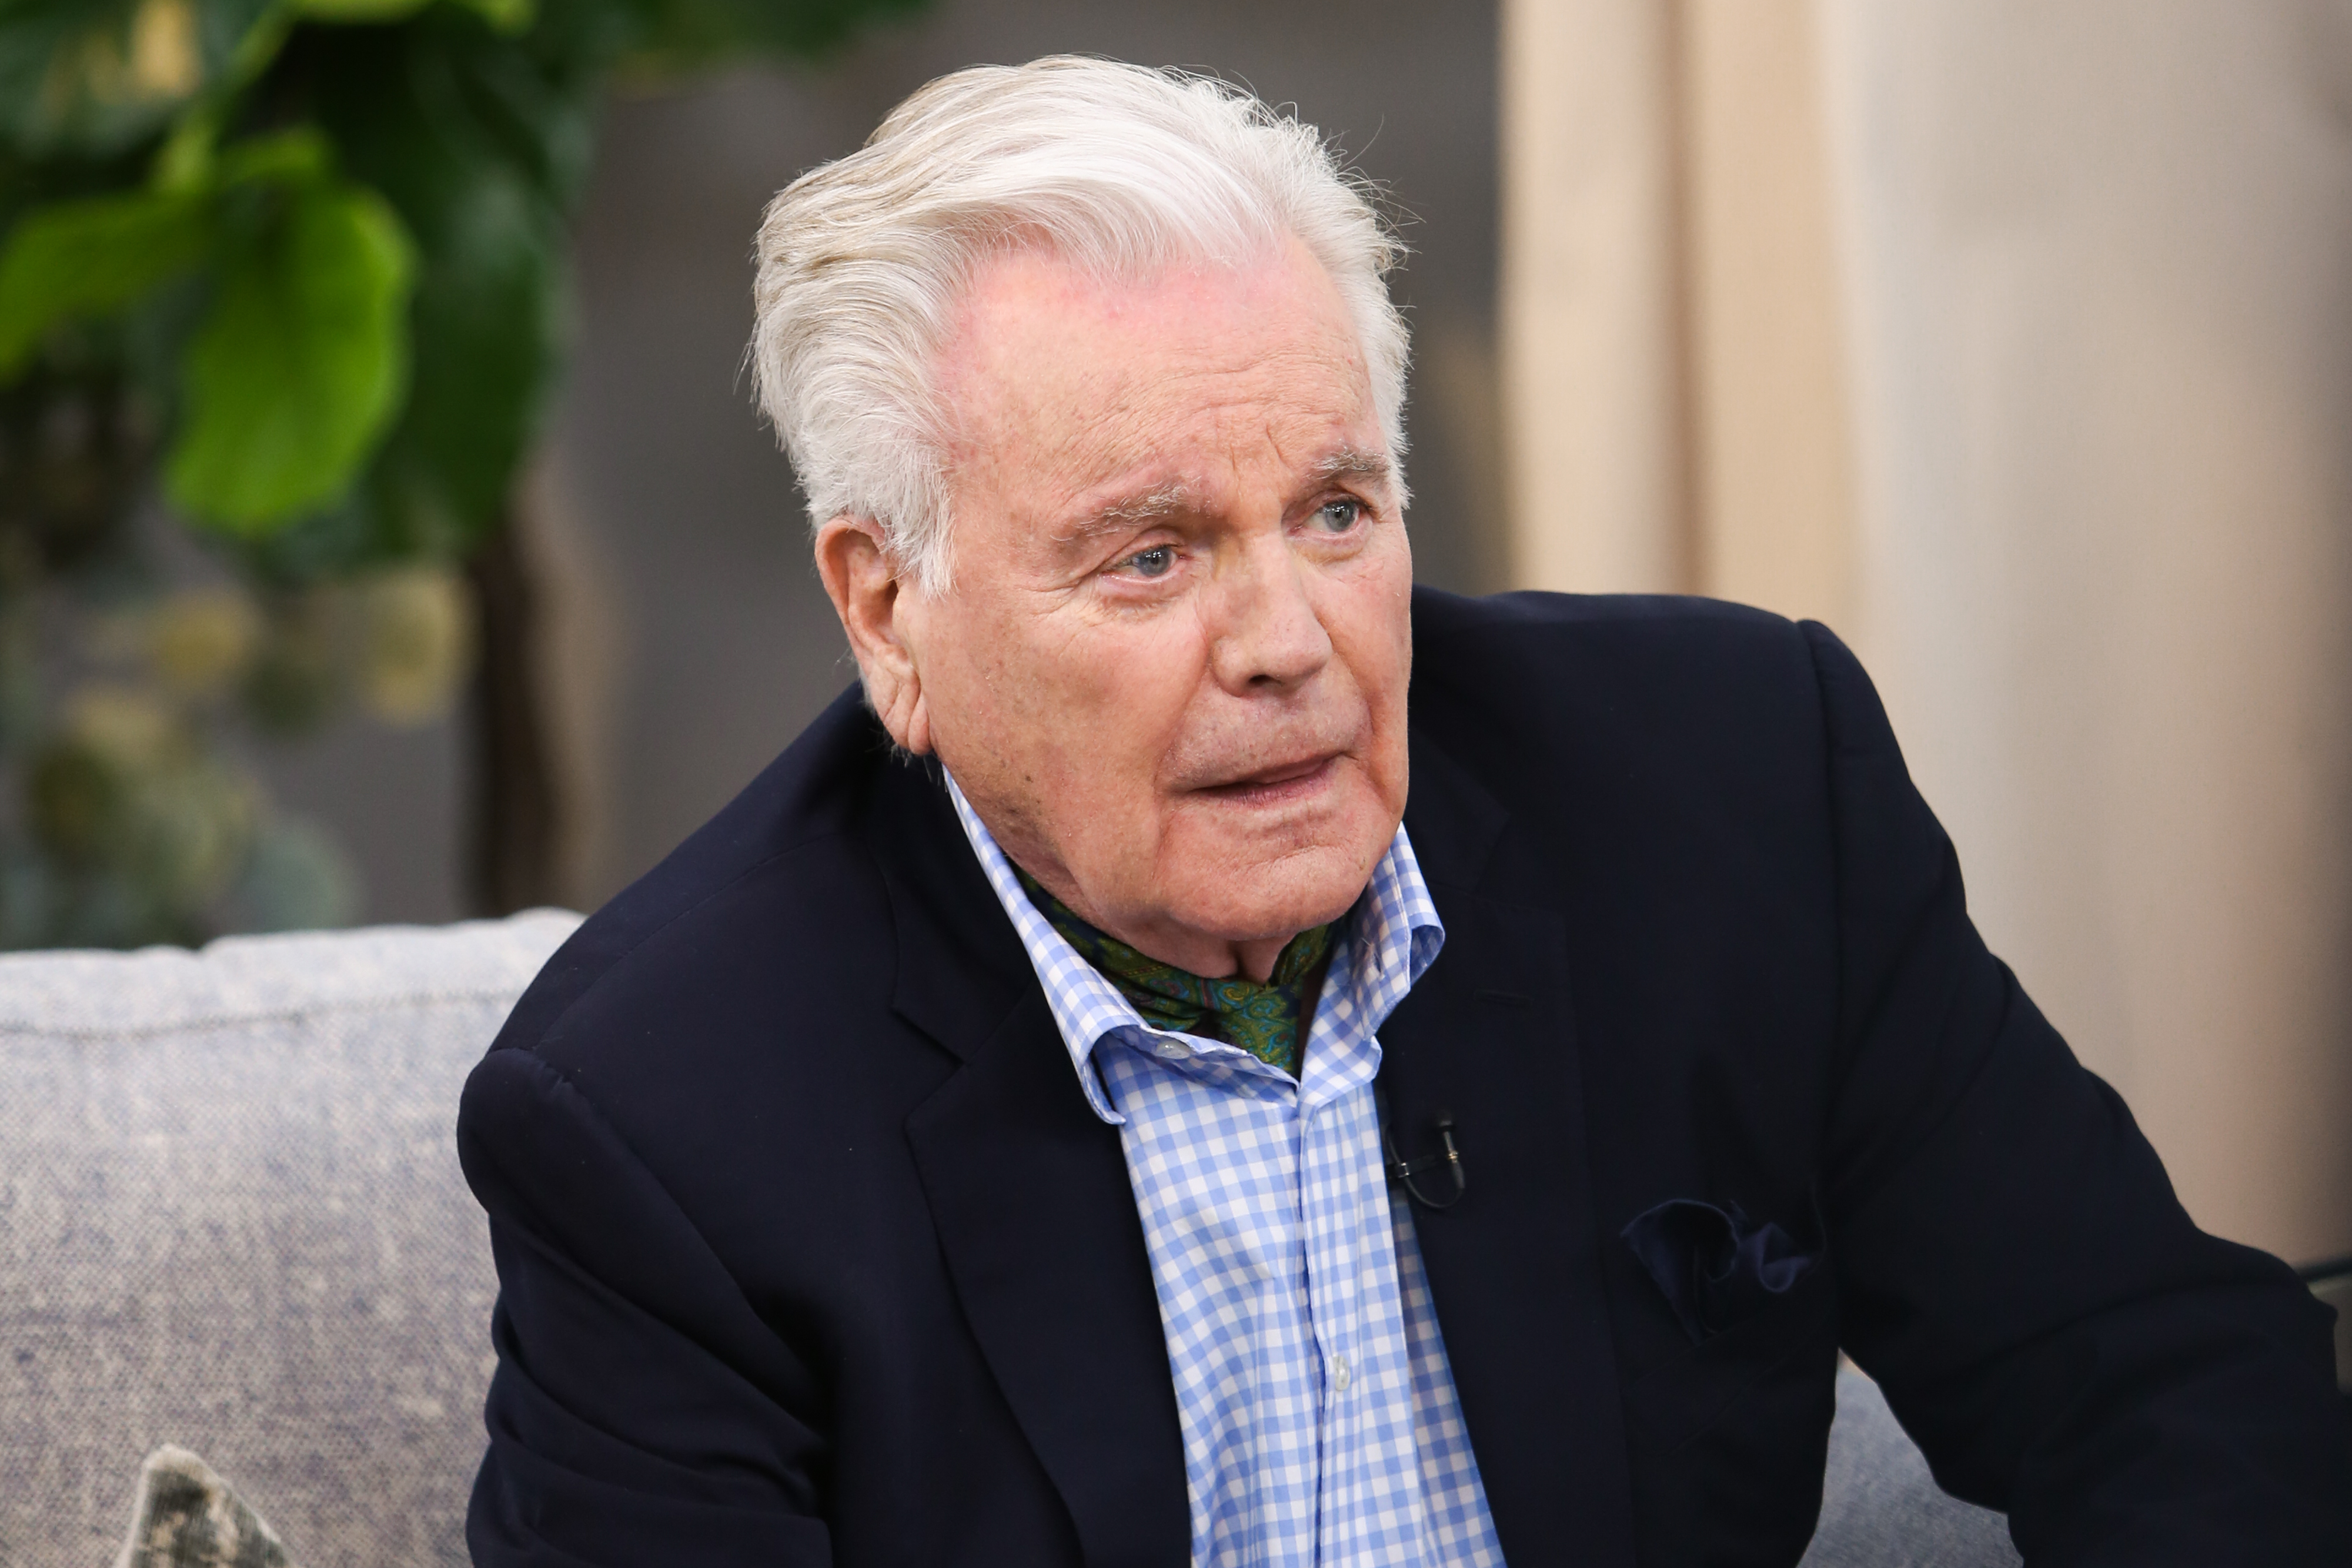 Robert Wagner in California in 2019 | Source: Getty Images